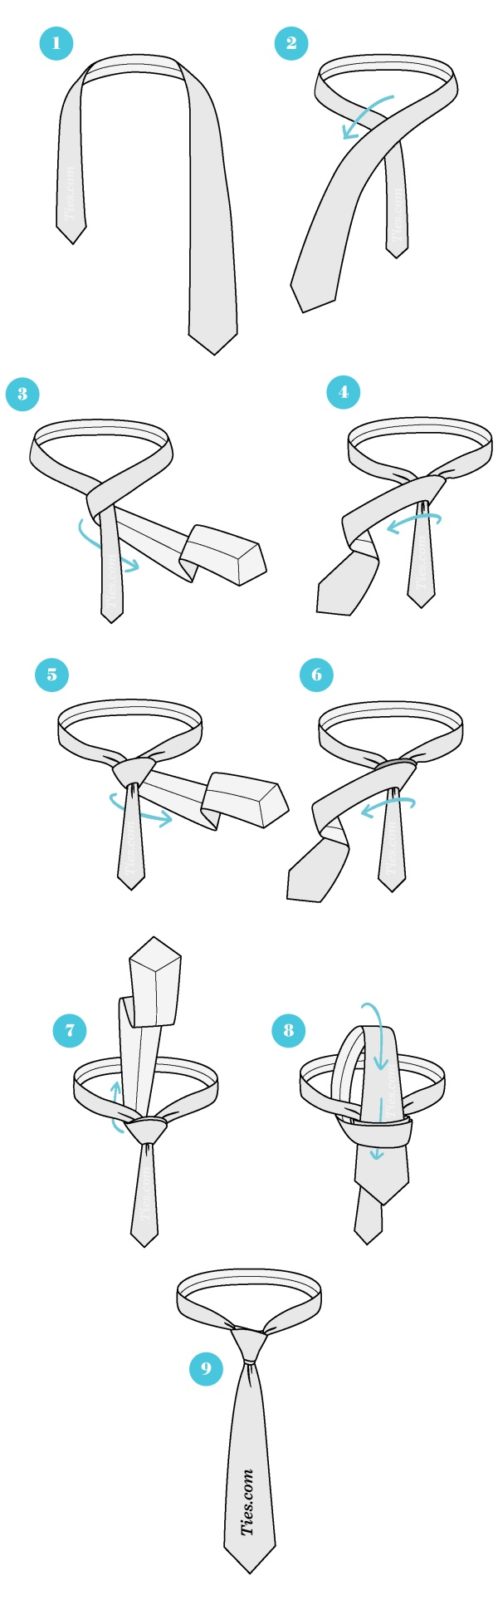 Easy Tie Knot Tutorials for Different Events